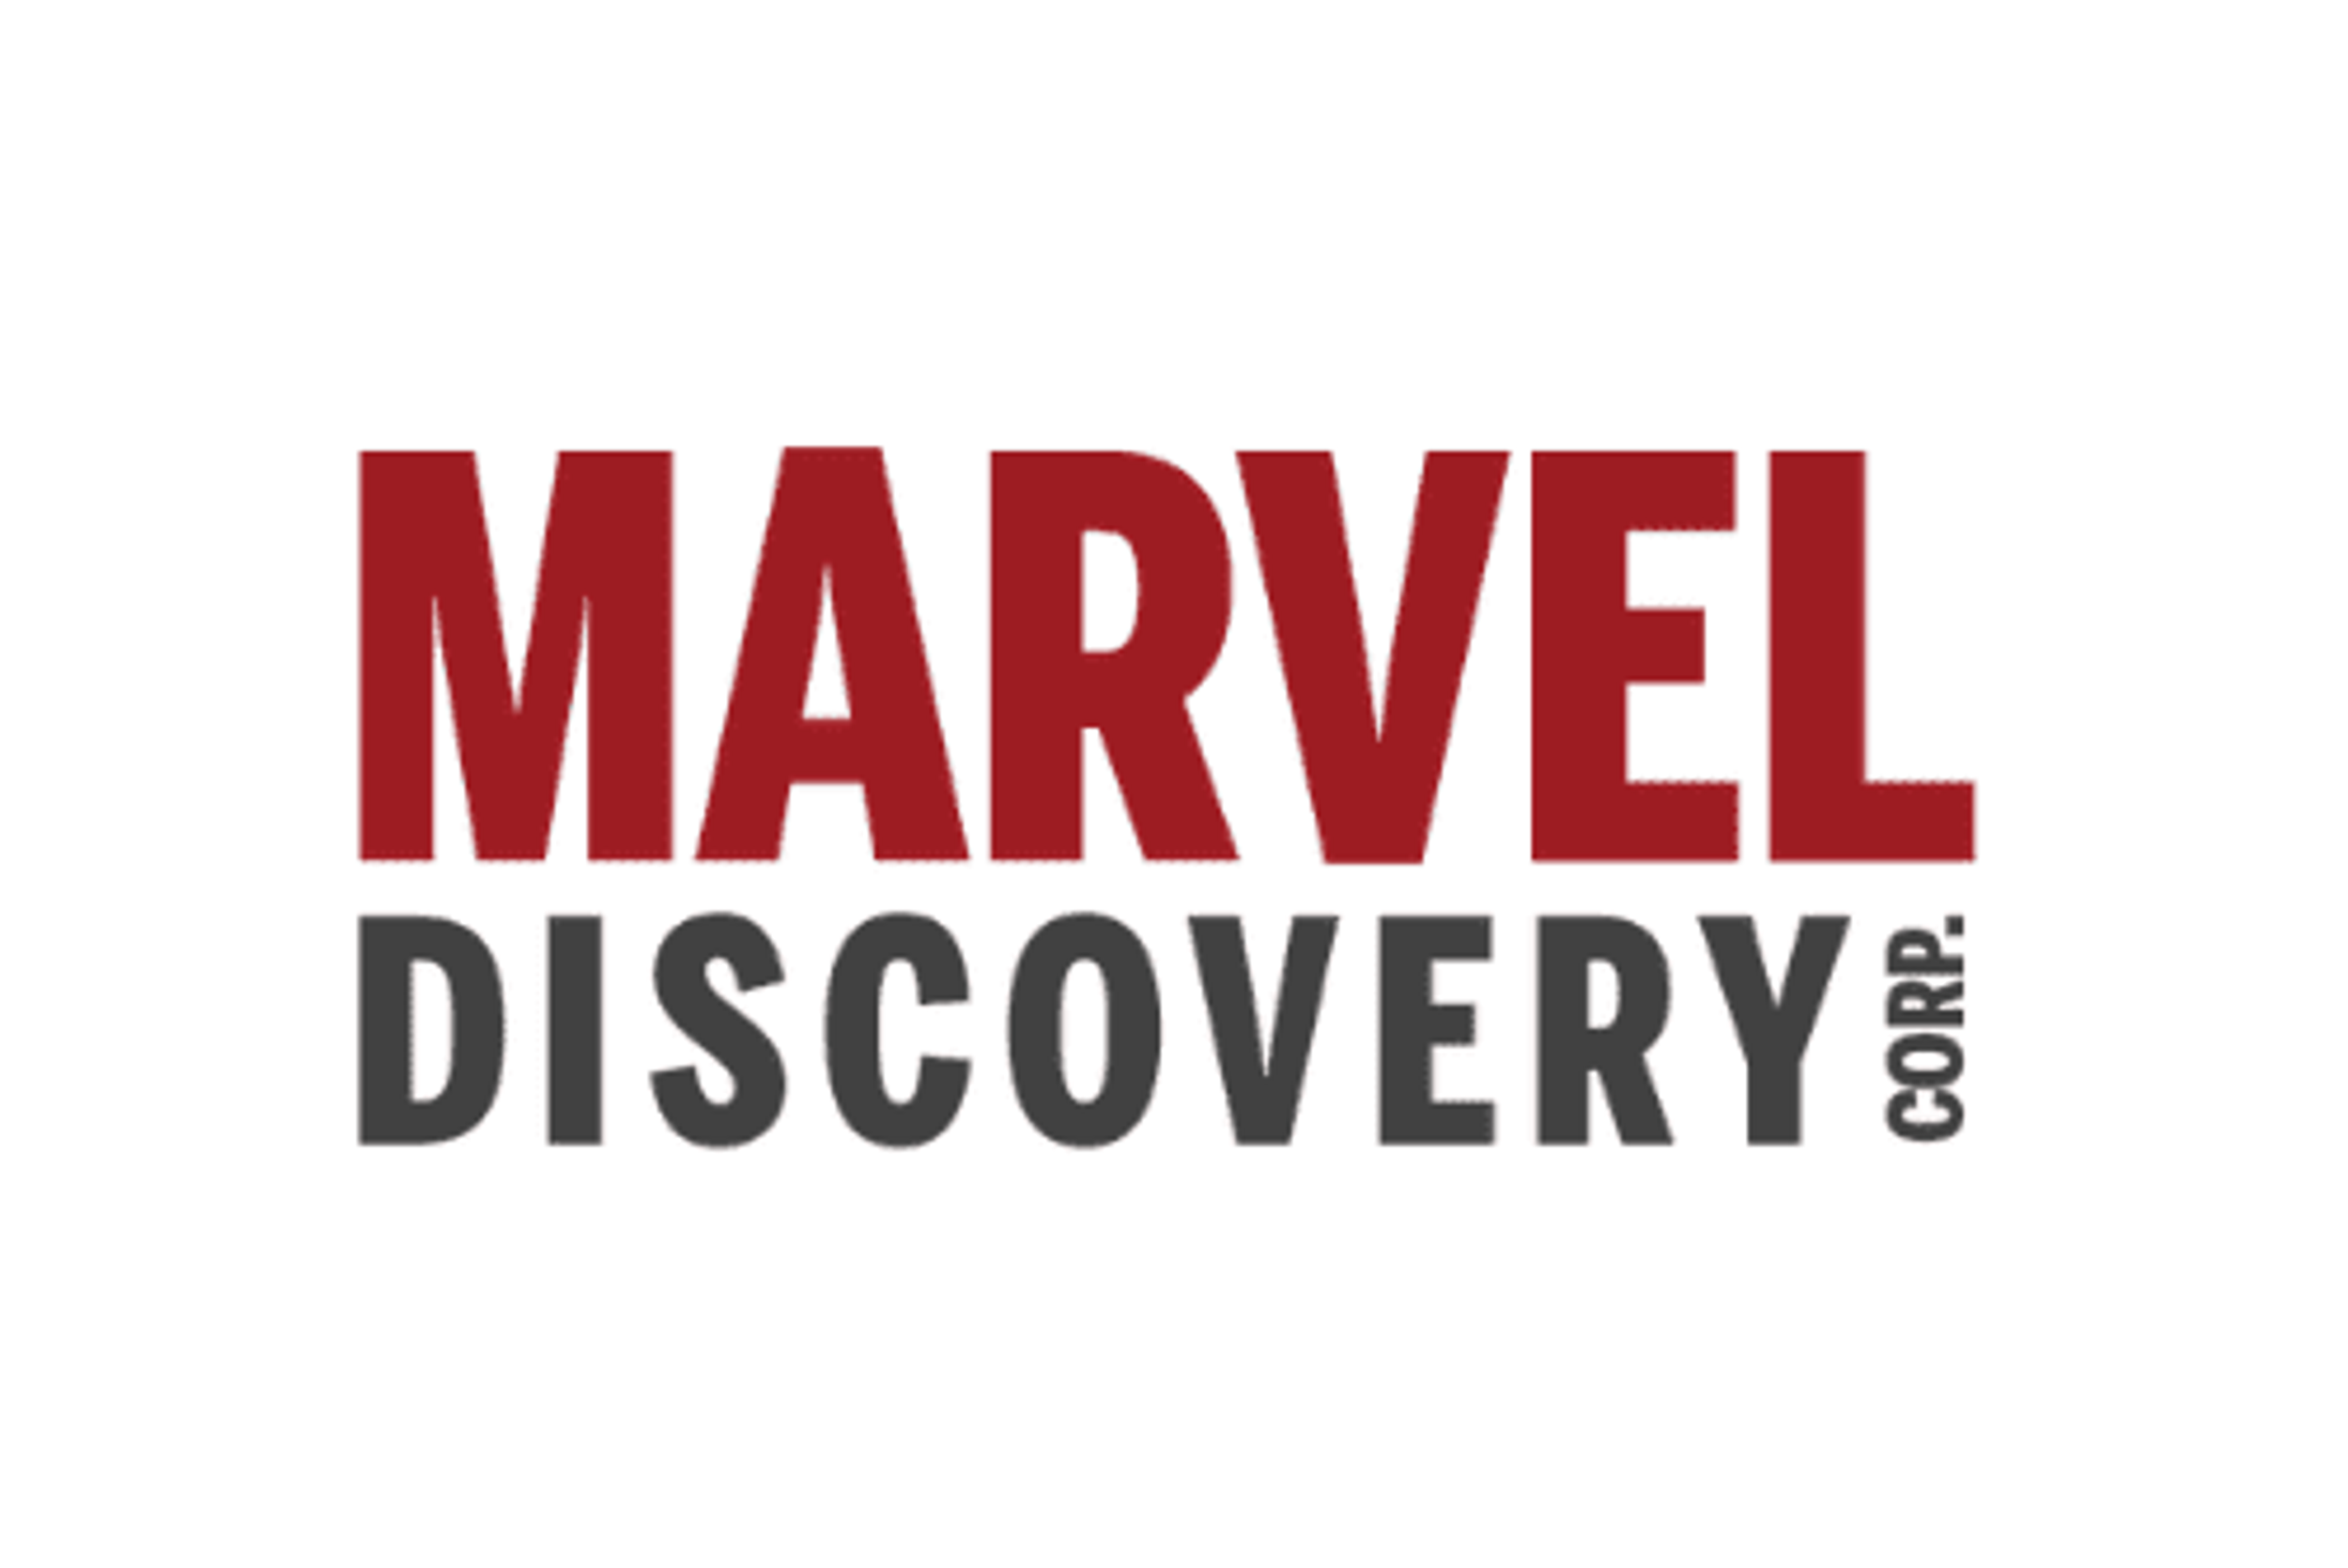 Marvel To Increase Land Position at Wicheeda Ree's Project Contiguous to Defense Metals